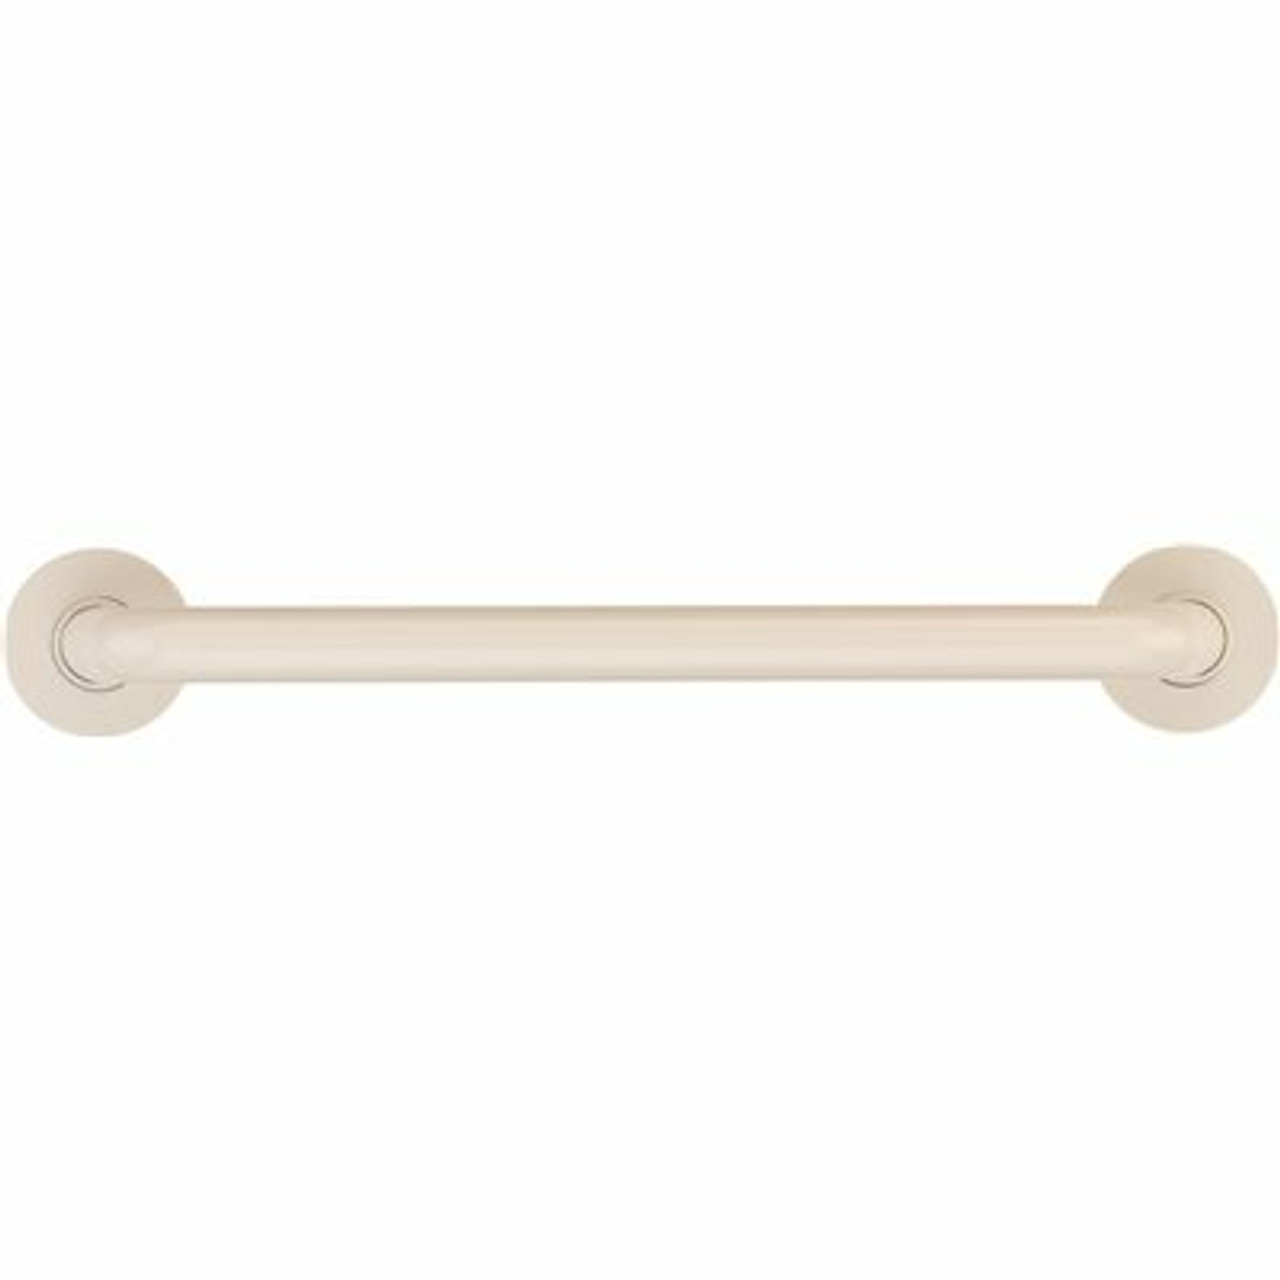 Ponte Giulio Usa 16 In. Contractor Antimicrobial Vinyl Coated Grab Bar In White